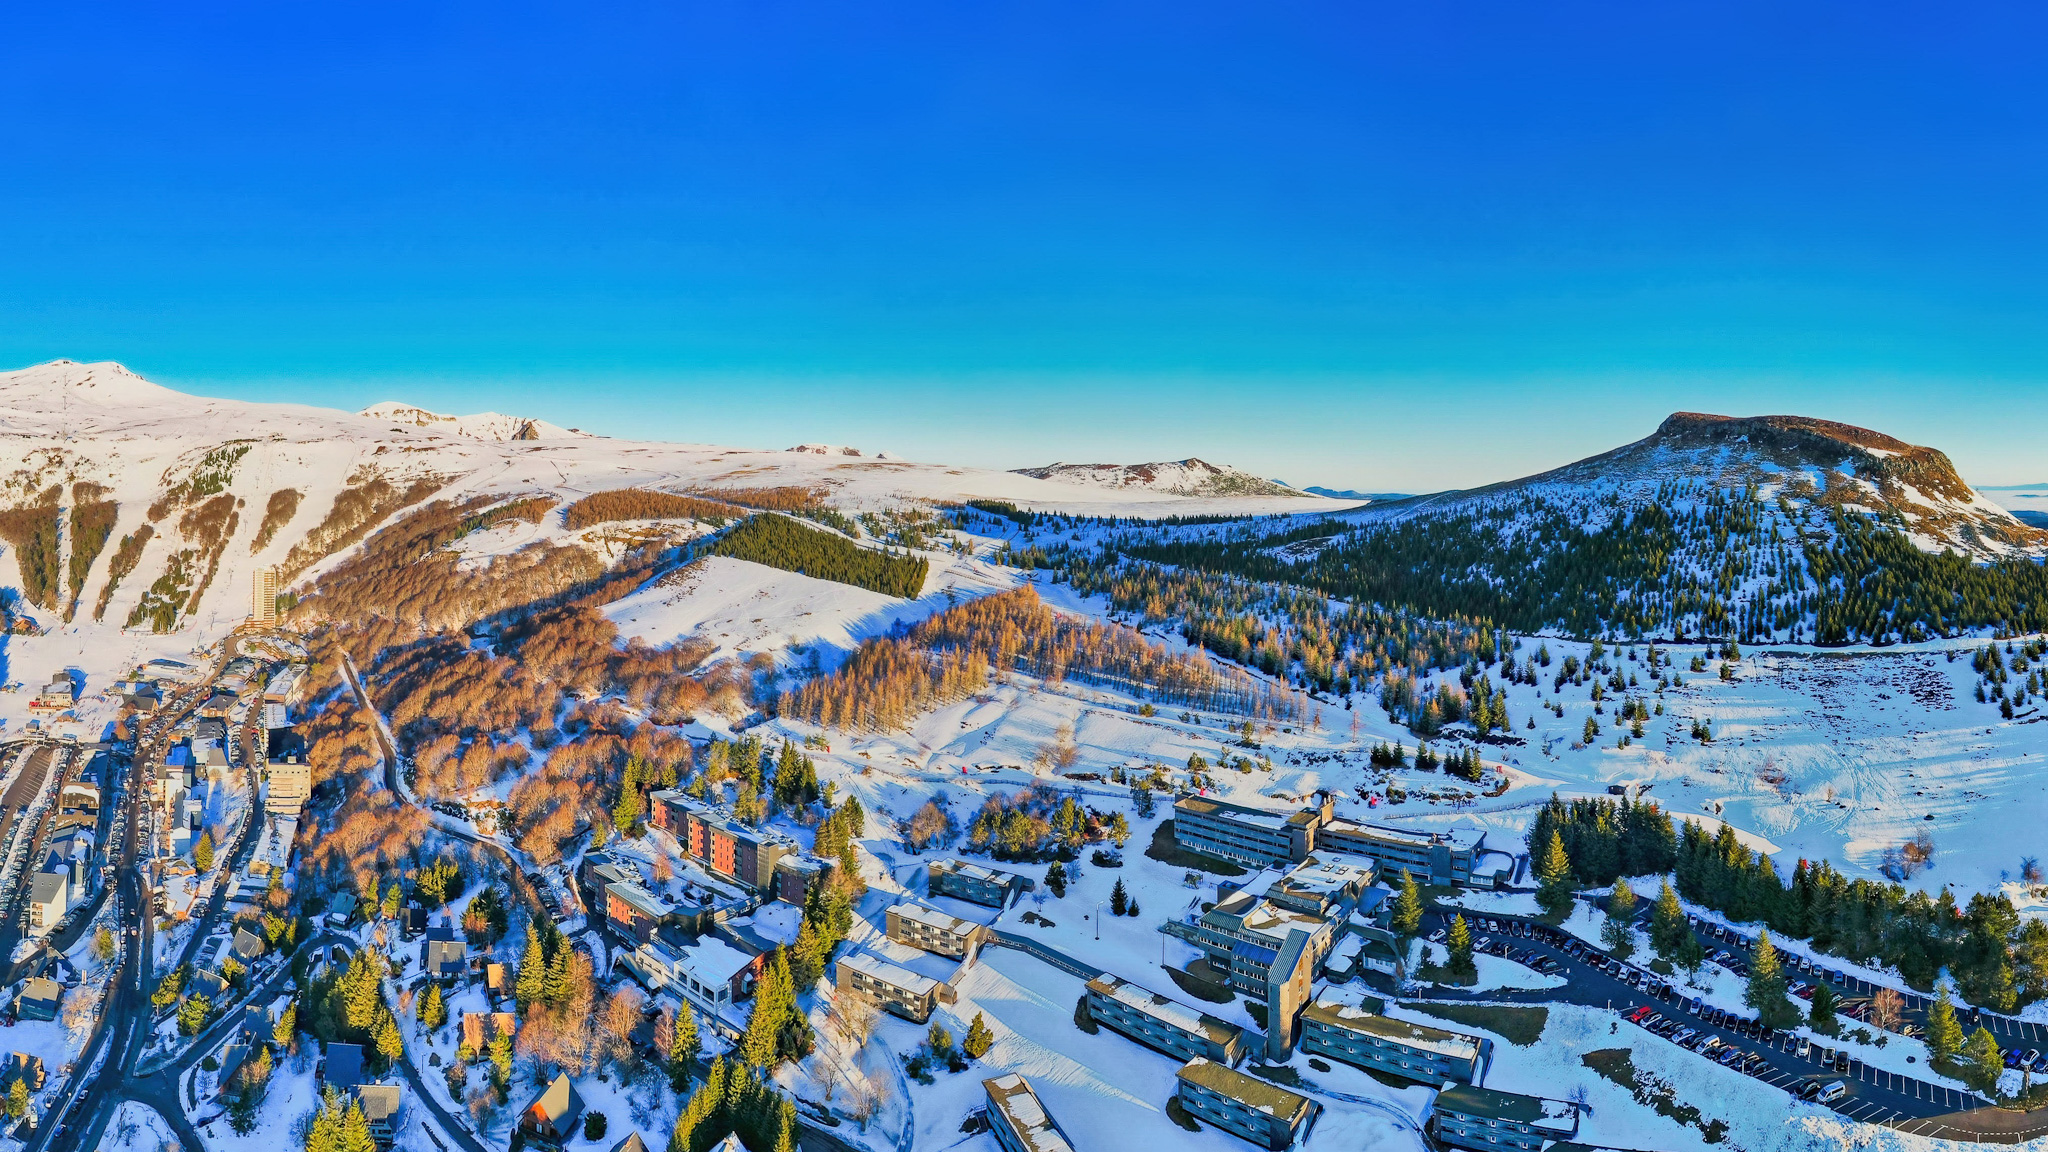 Puy de Chambourguet and the ski resort of Besse